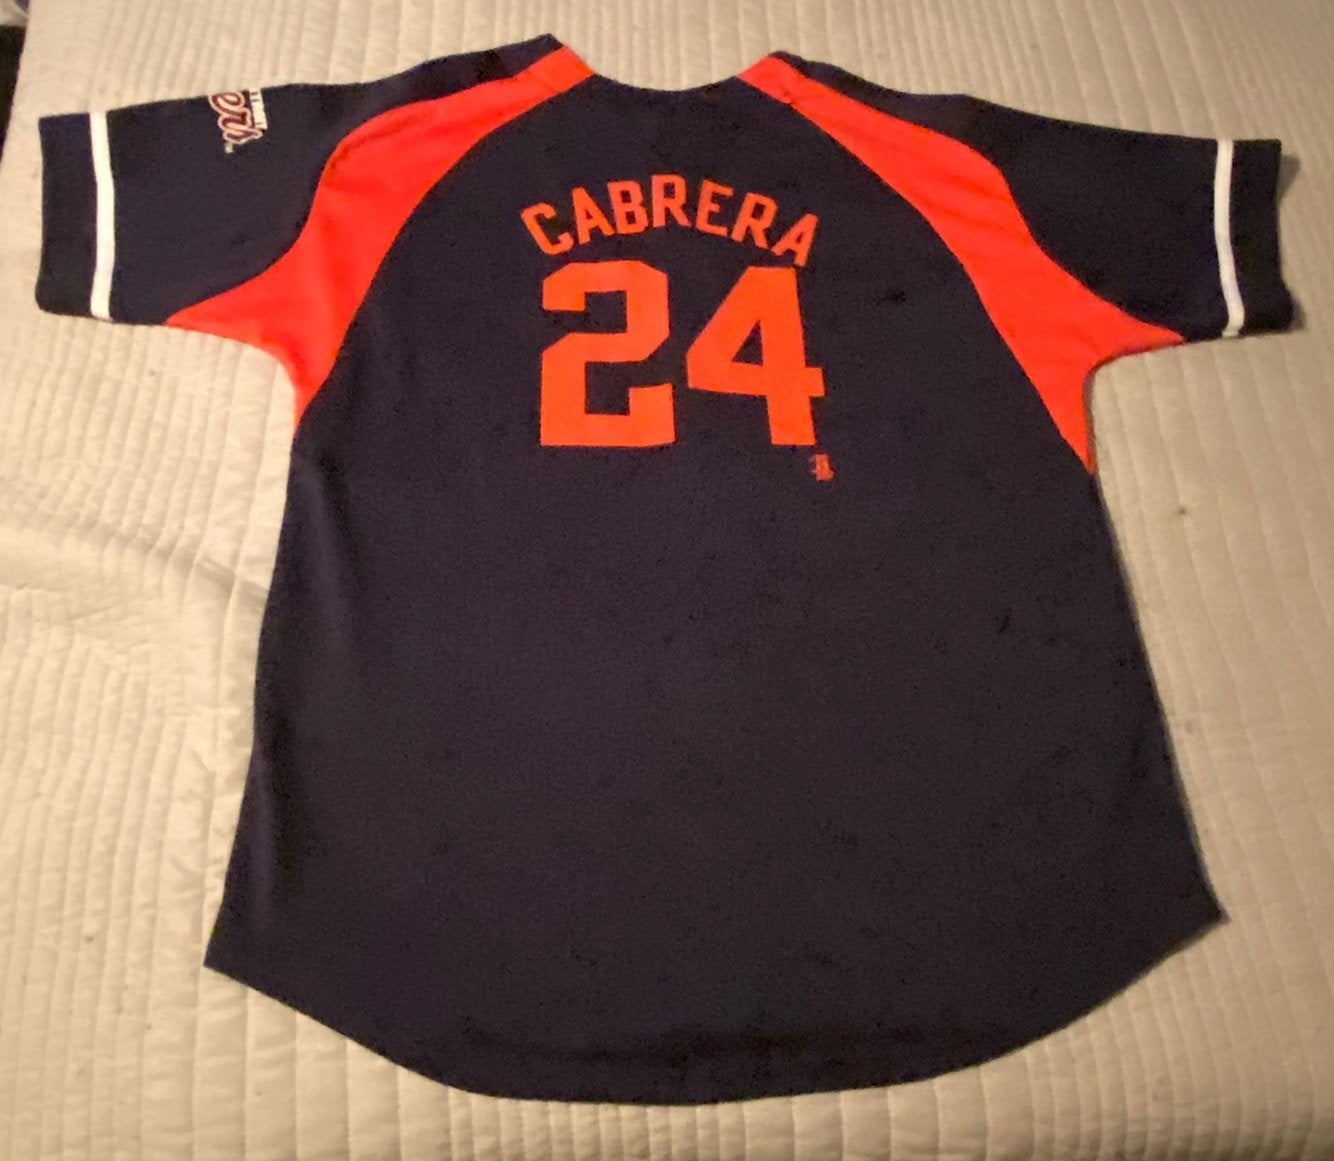 Miguel Cabrera Signed Detroit Tigers White Nike Baseball Jersey BAS IT